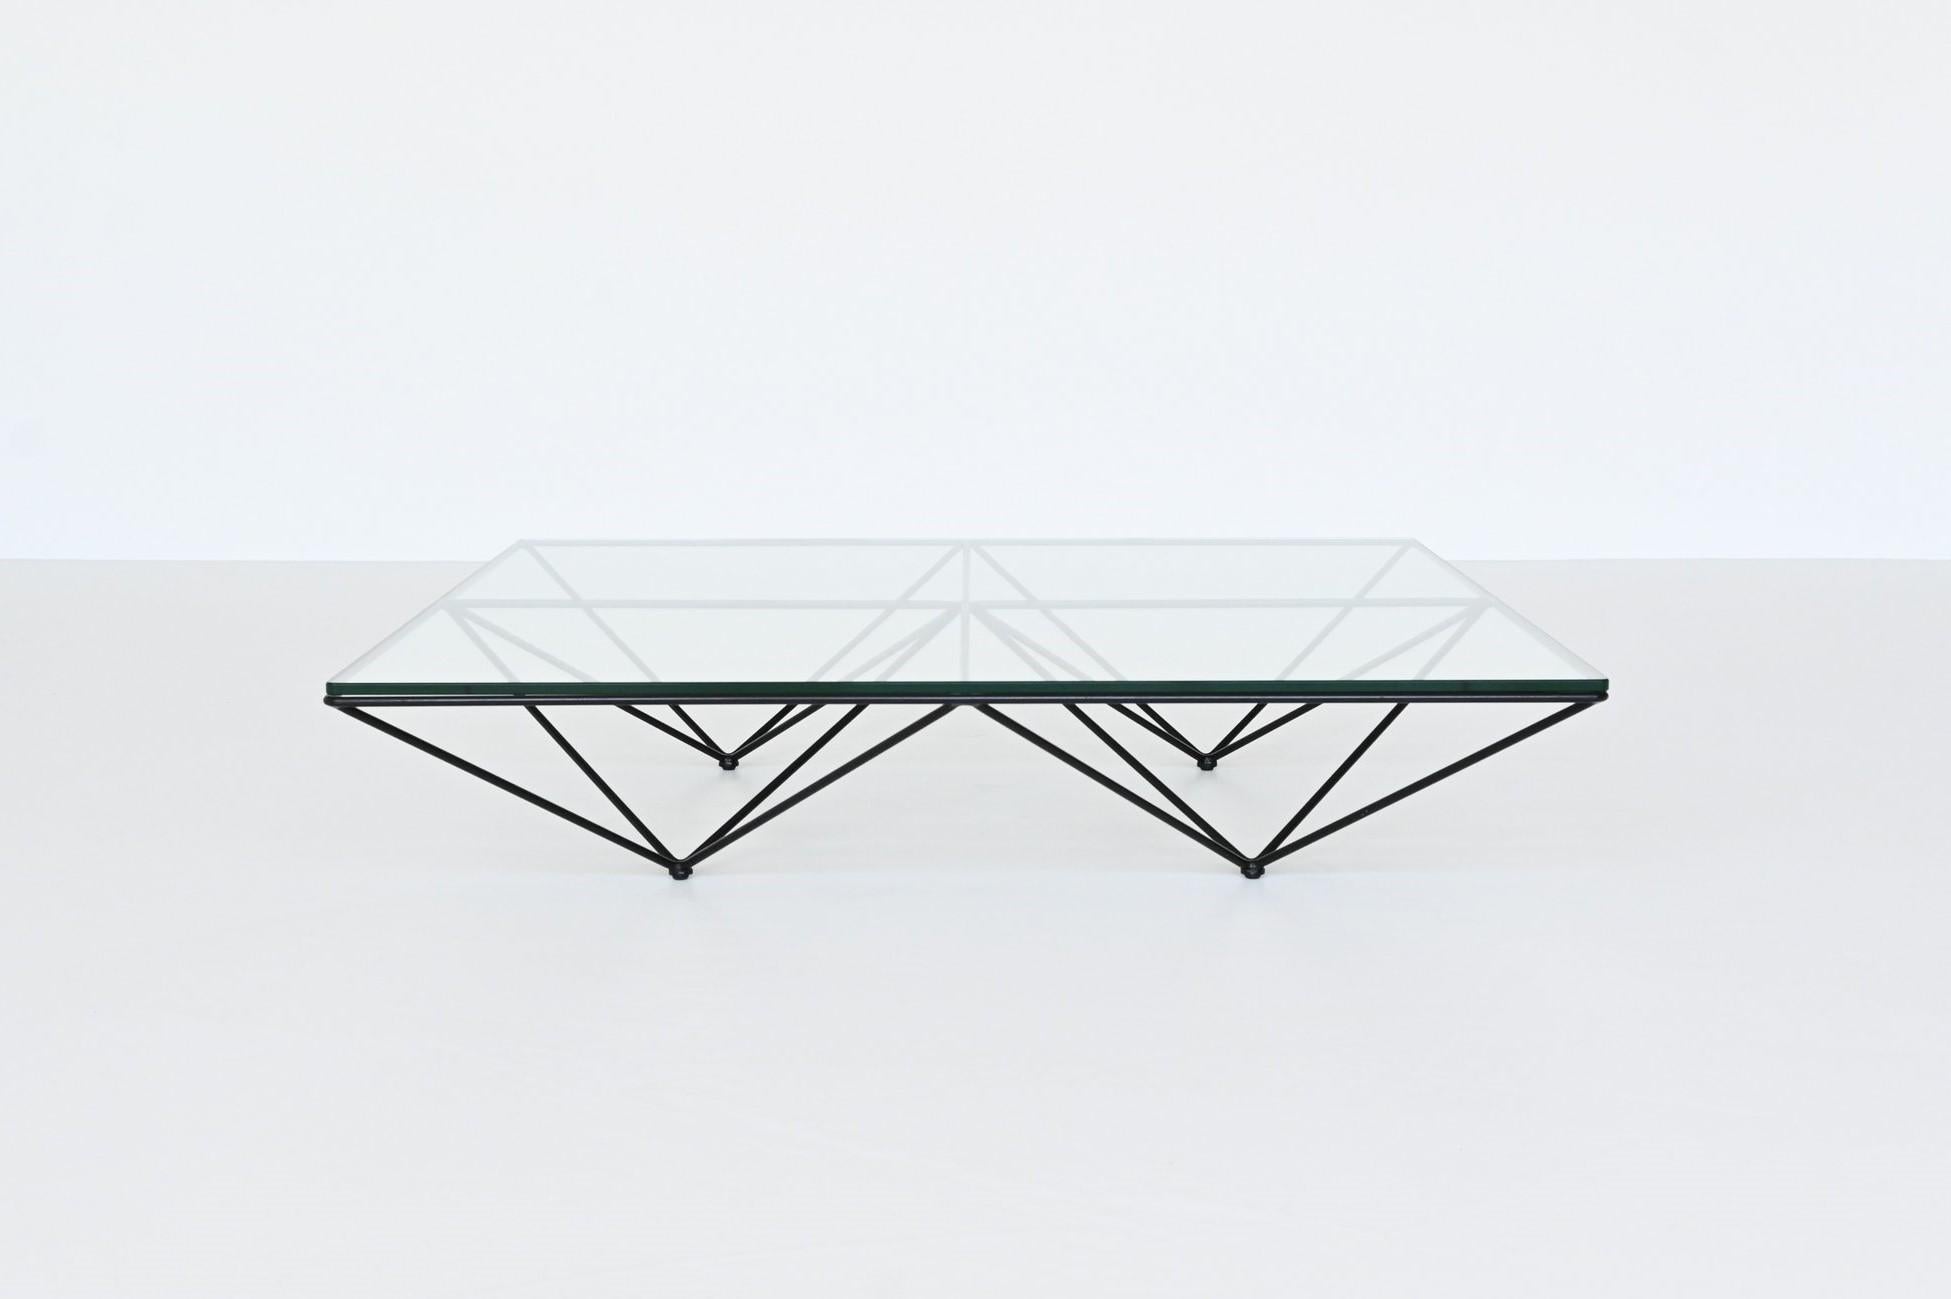 Beautiful modernist coffee table model Alanda designed by Paolo Piva and manufactured by B&B Italia, Italy 1982. This spectacular geometric coffee table has a solid black lacquered metal frame, connected like a spider web. The low base supports a